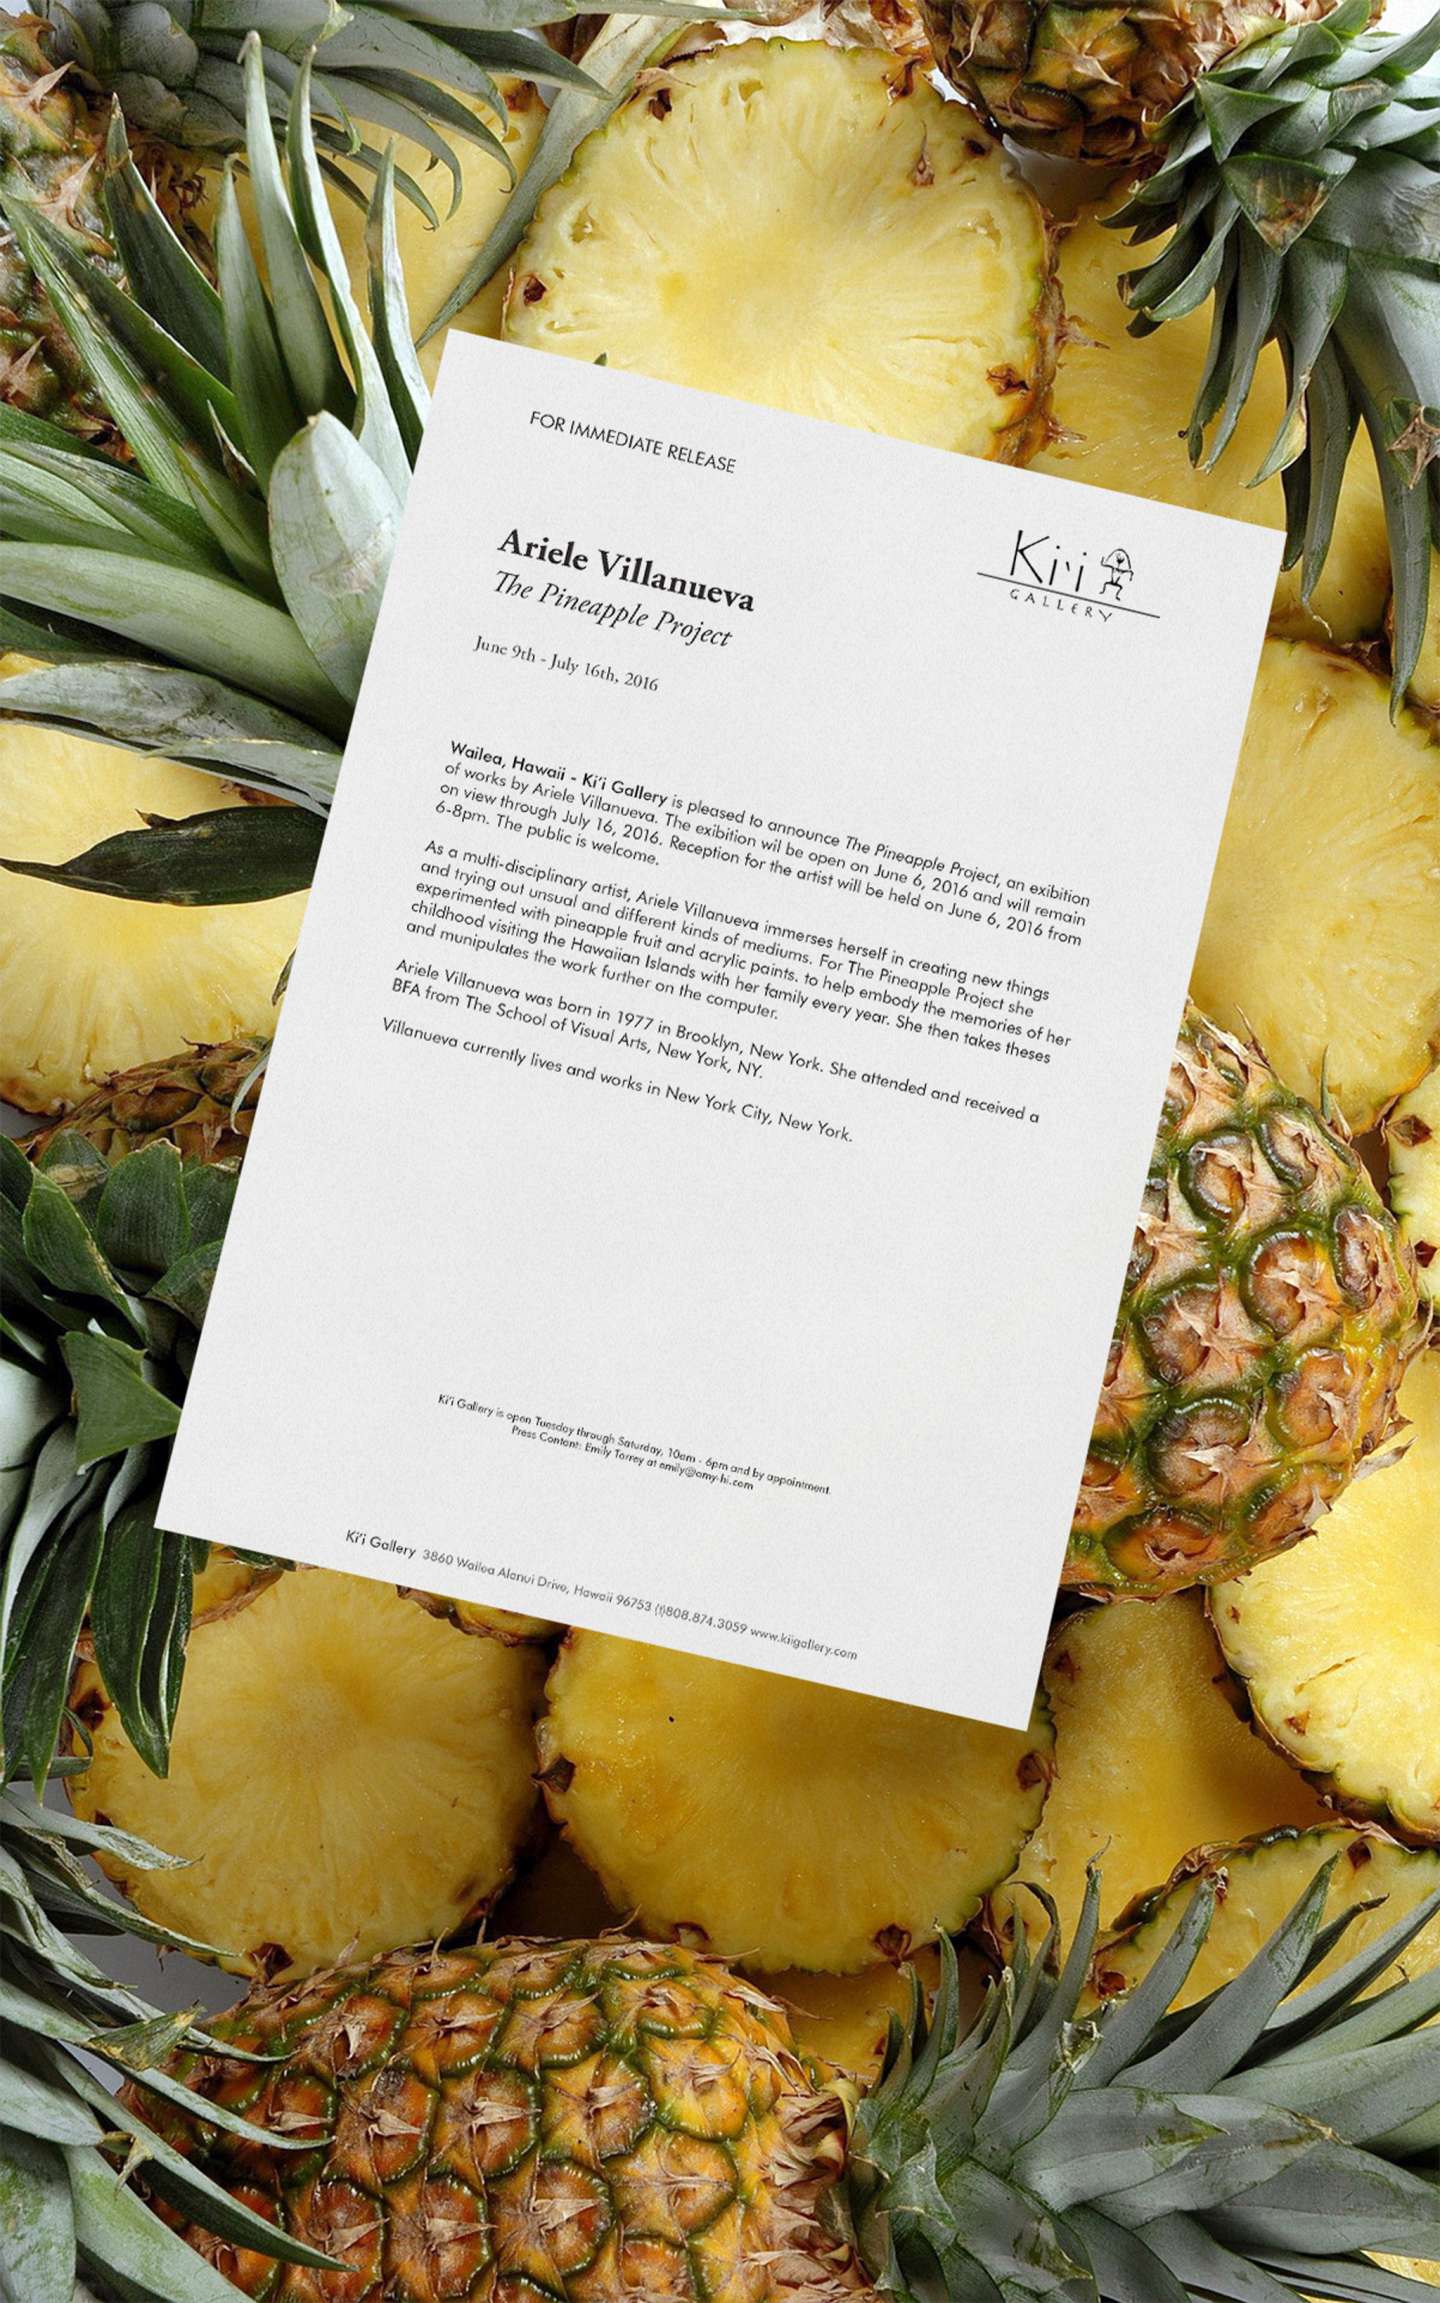 The Pineapple Project